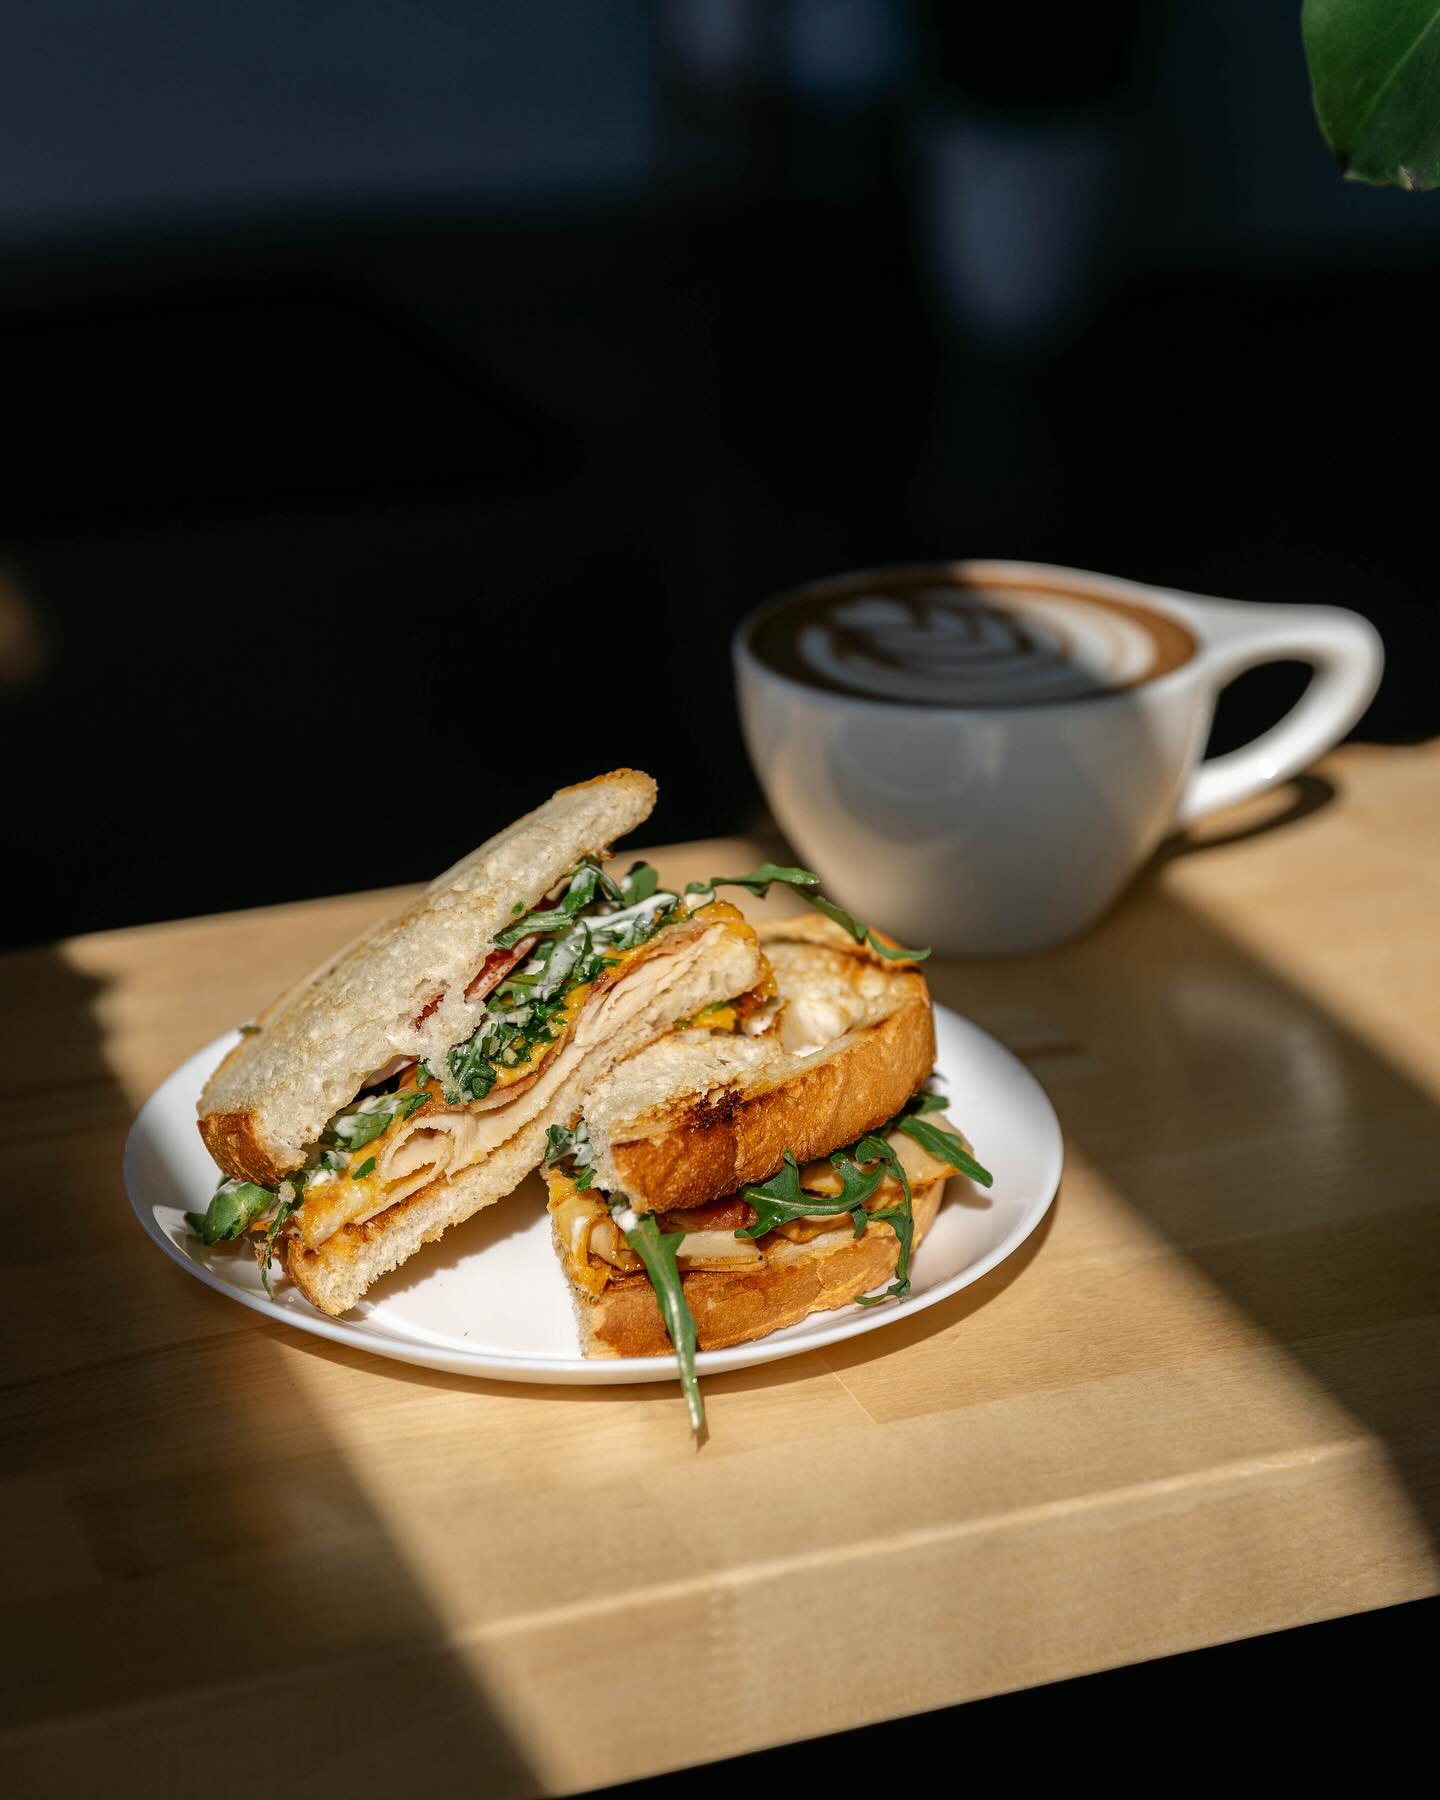 Start the week off right with a Chicken Bacon Ranch Sandwich 🥪

#coalescencecoffee